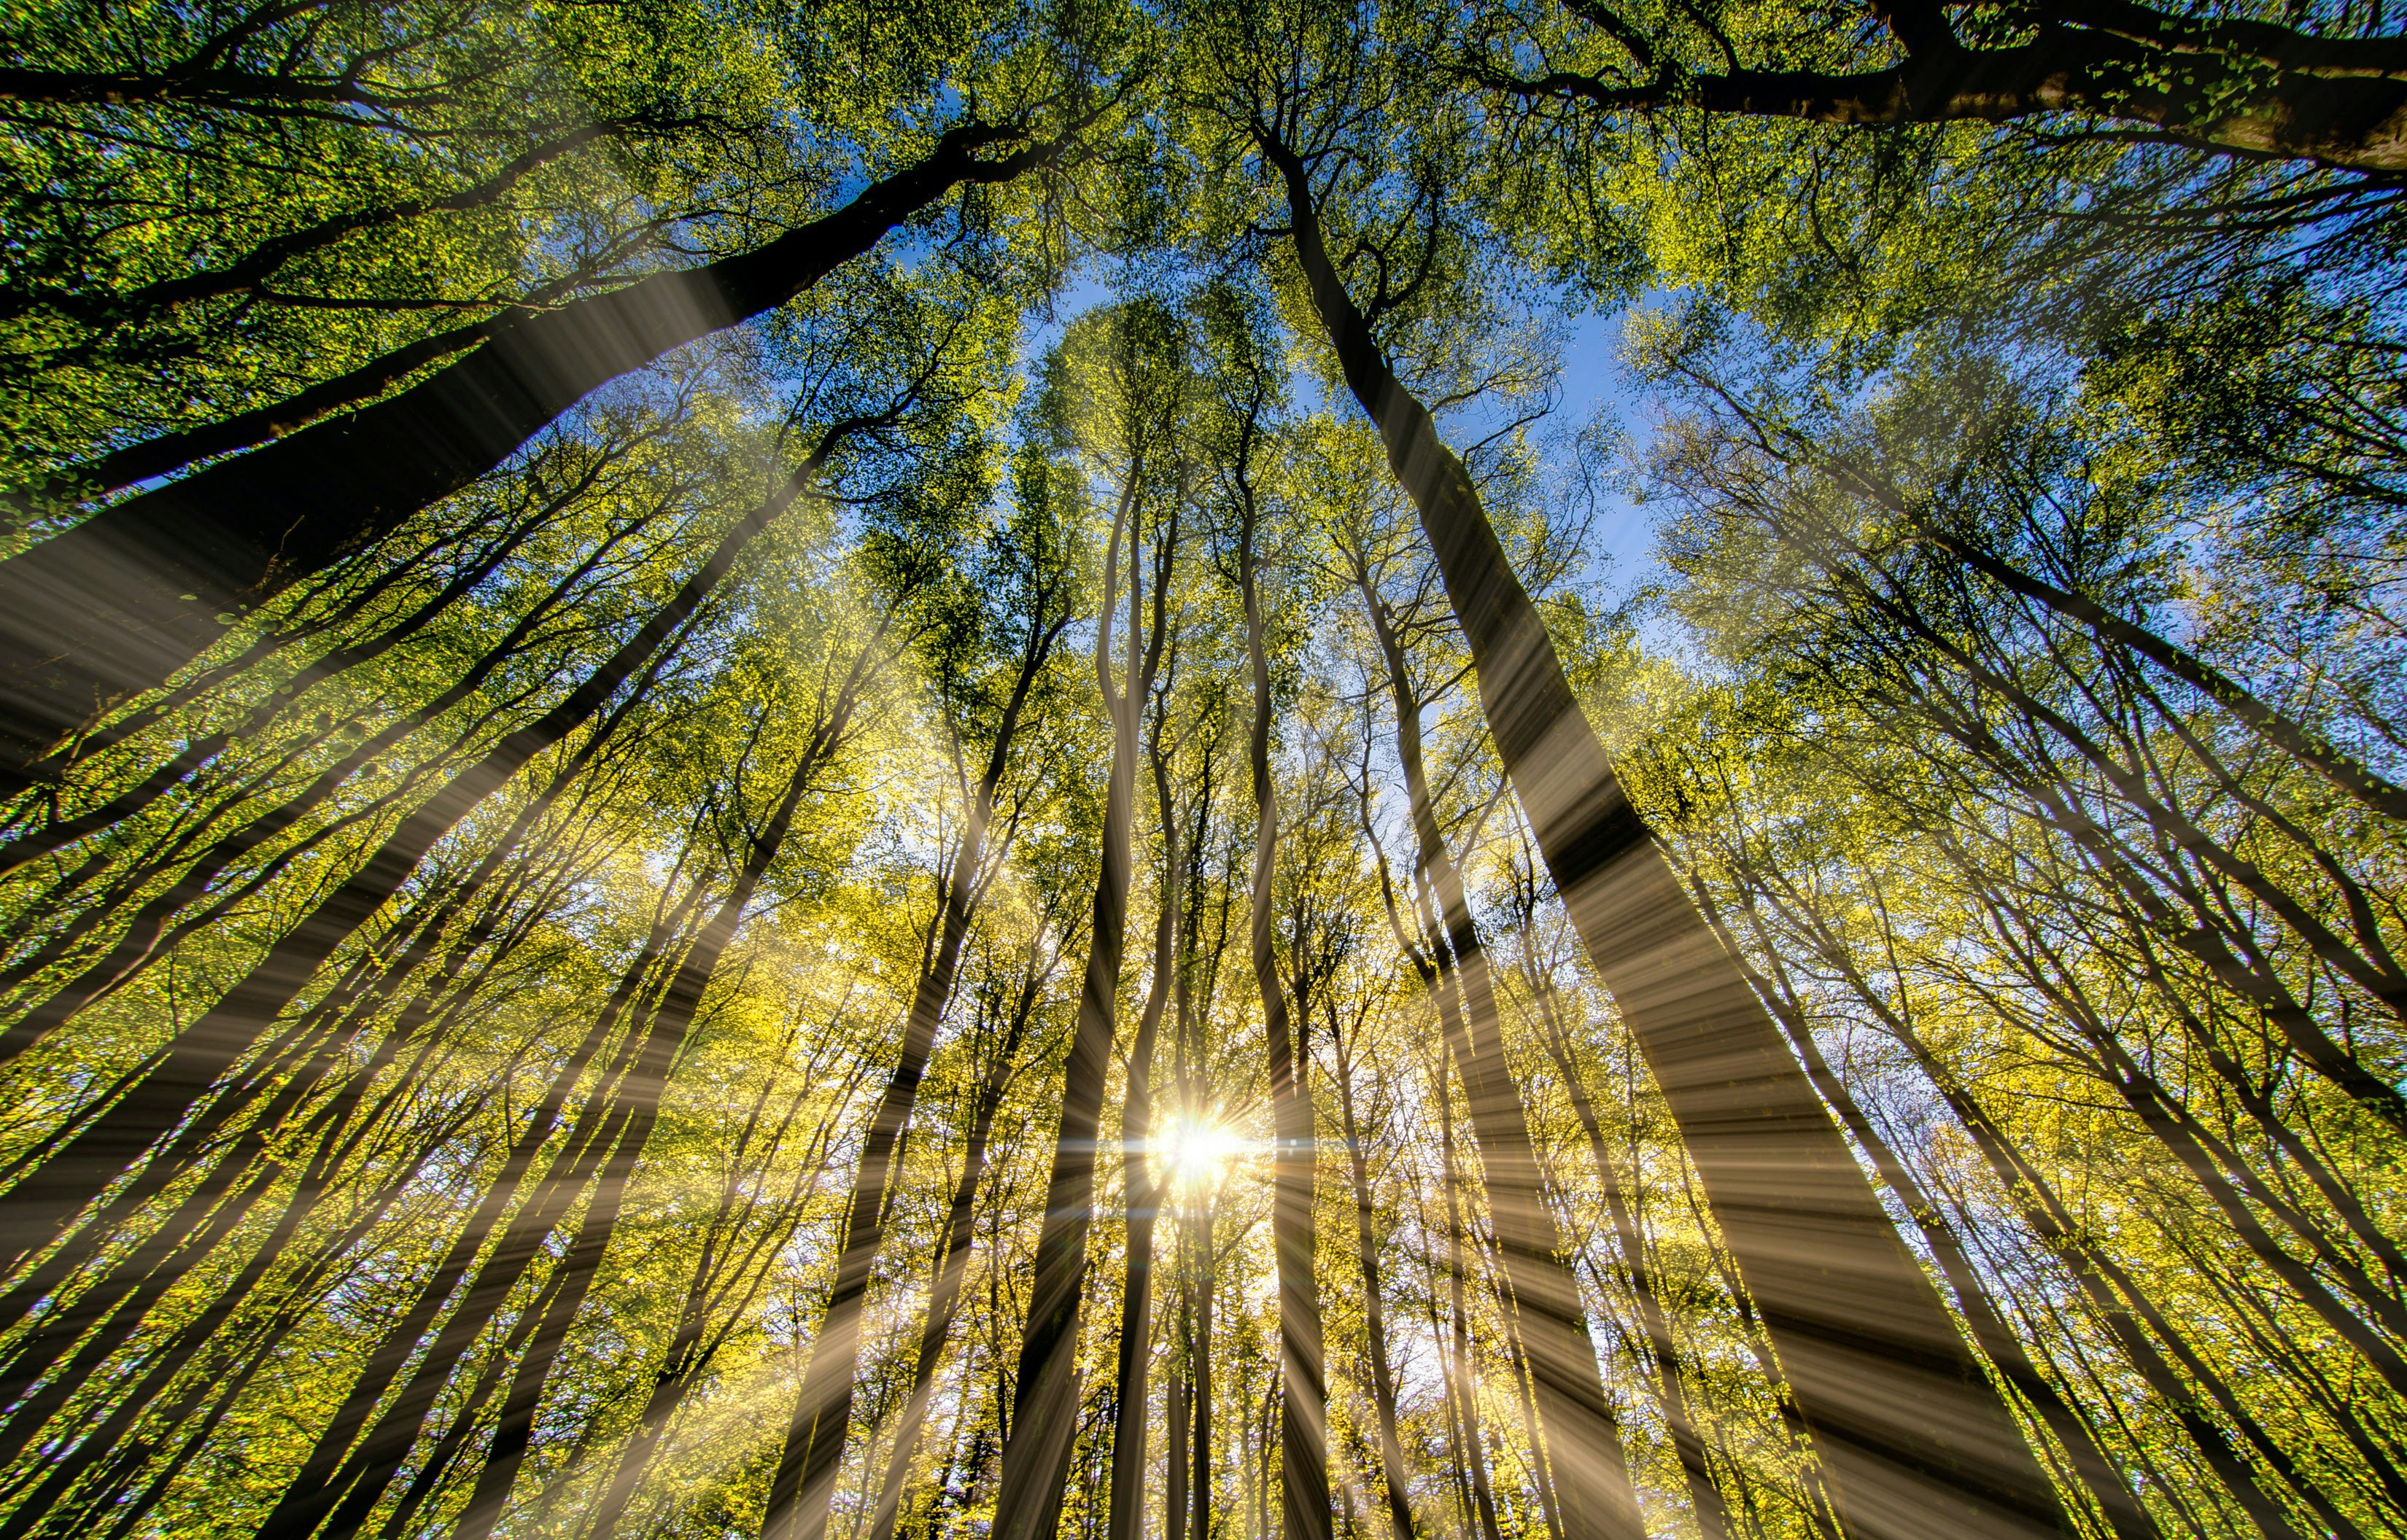 Orig Low Angle View of a Forest Unsplash